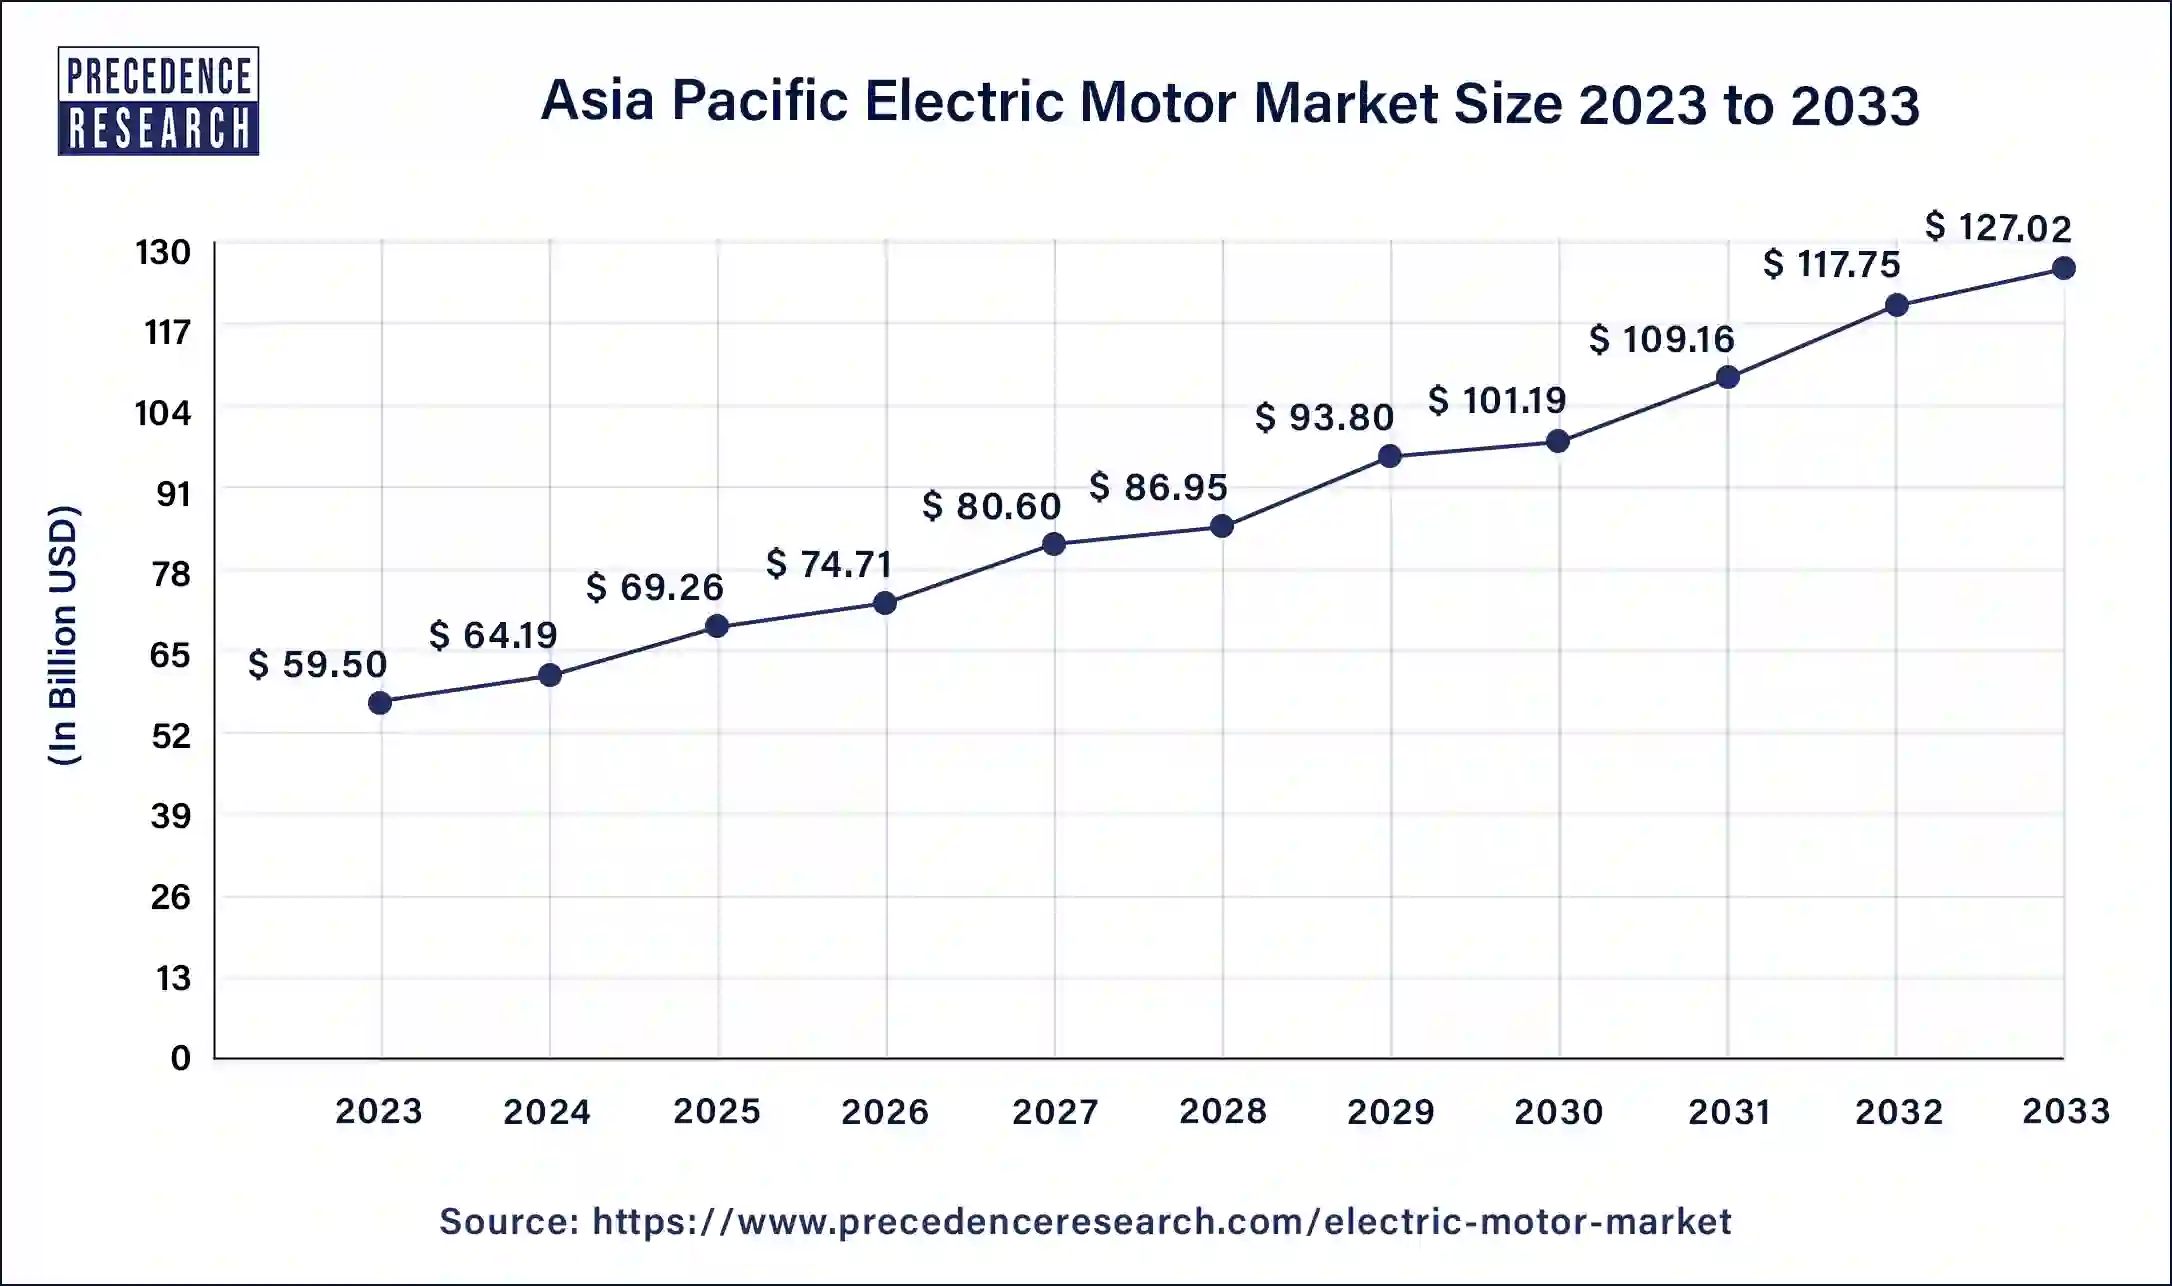 Asia Pacific Electric Motor Market Size 2024 to 2033